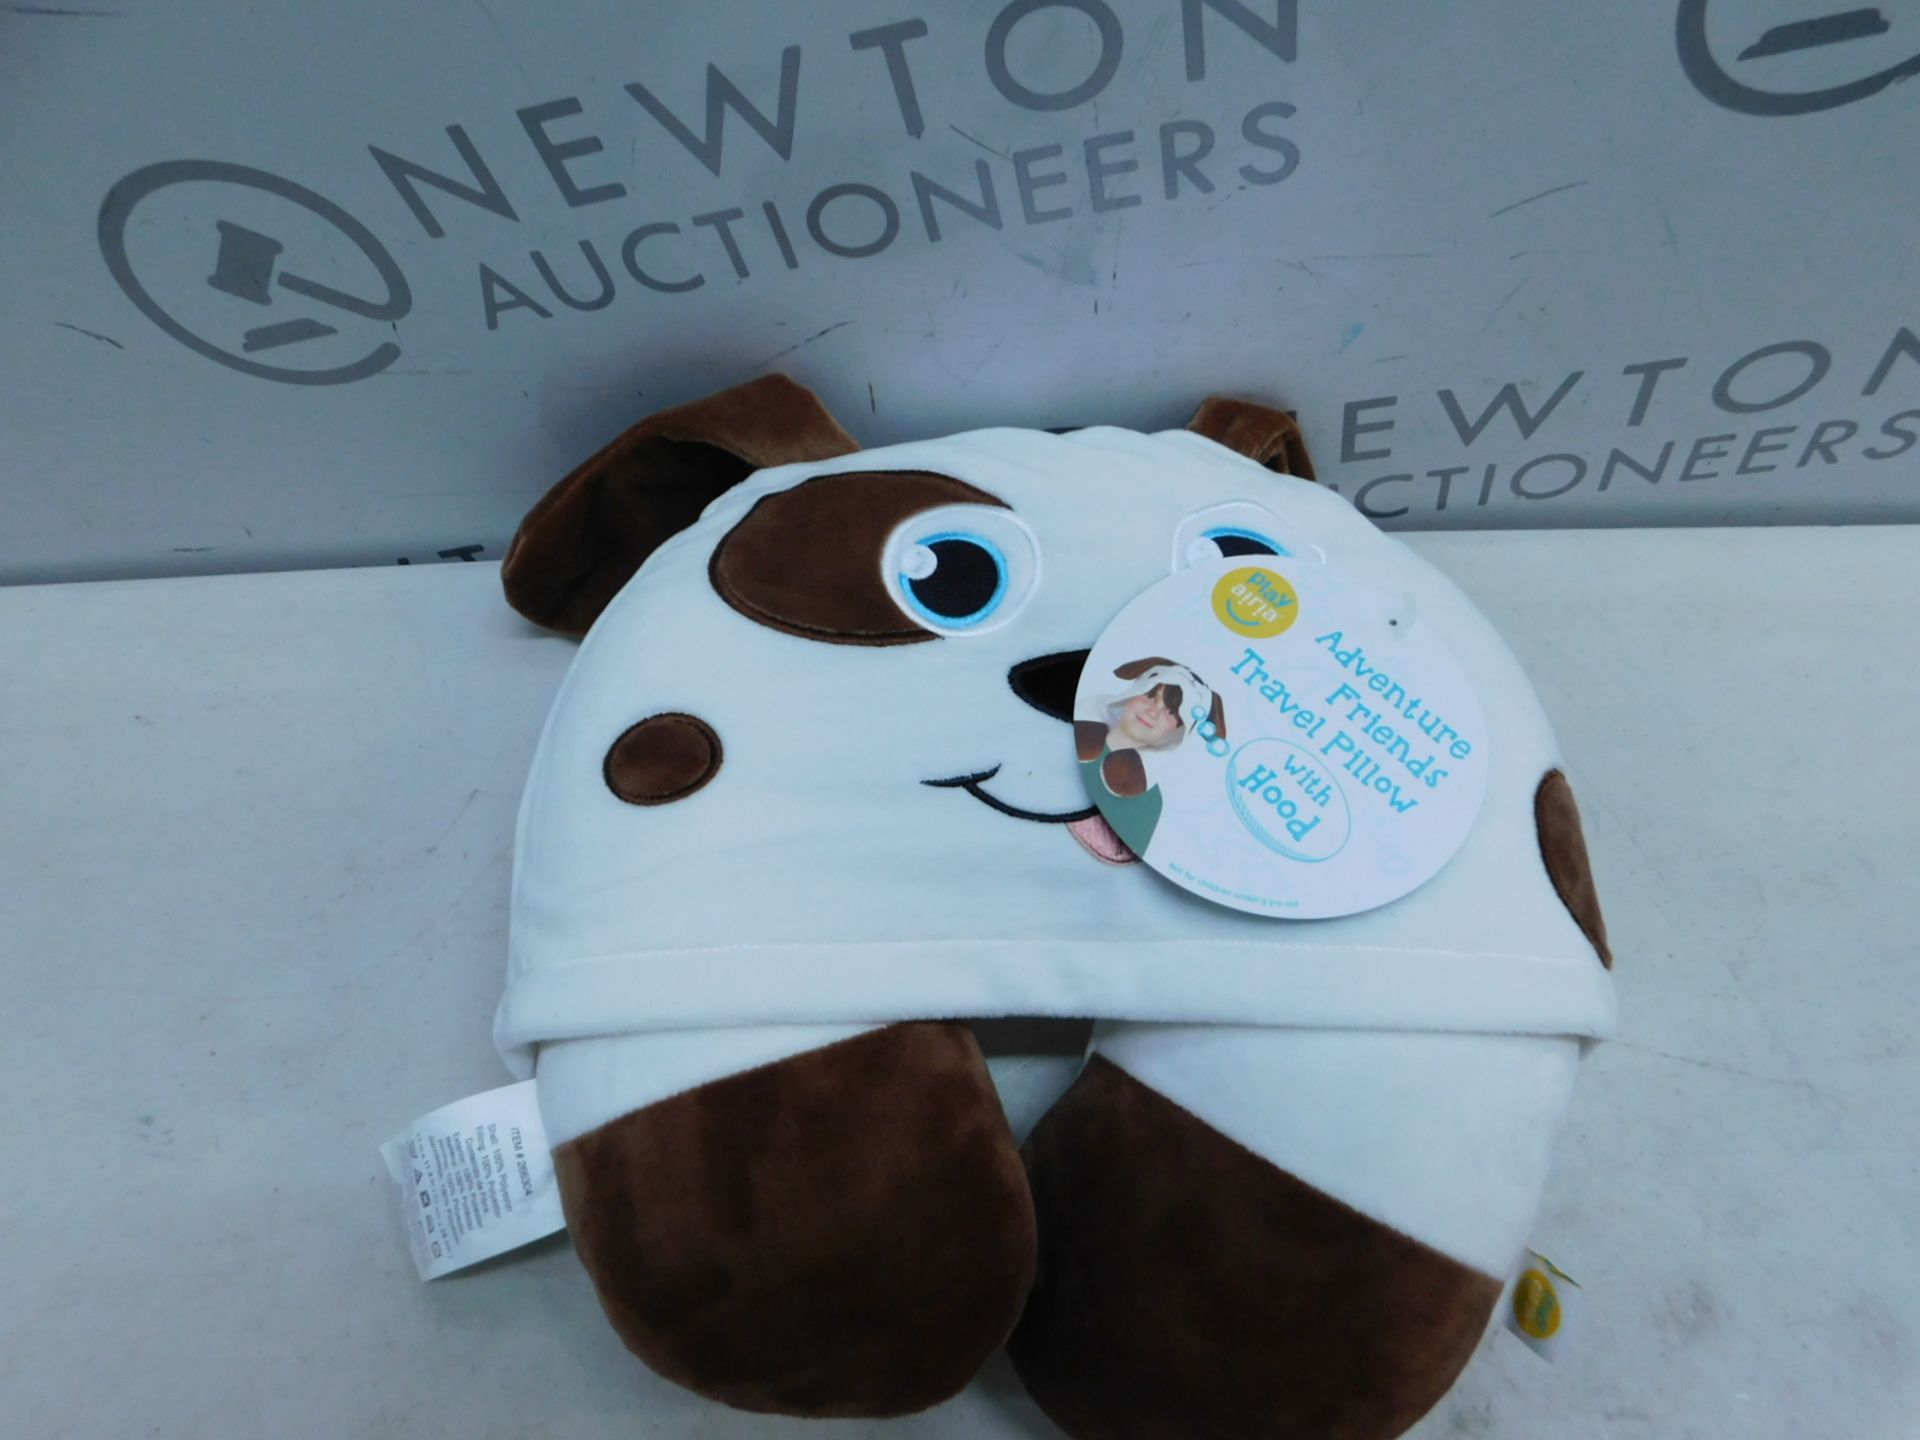 1 BRAND NEW PLAYAIRIA ADVENTURE FRIENDS PUPPY TRAVEL PILLOW WITH HOOD RRP £19.99